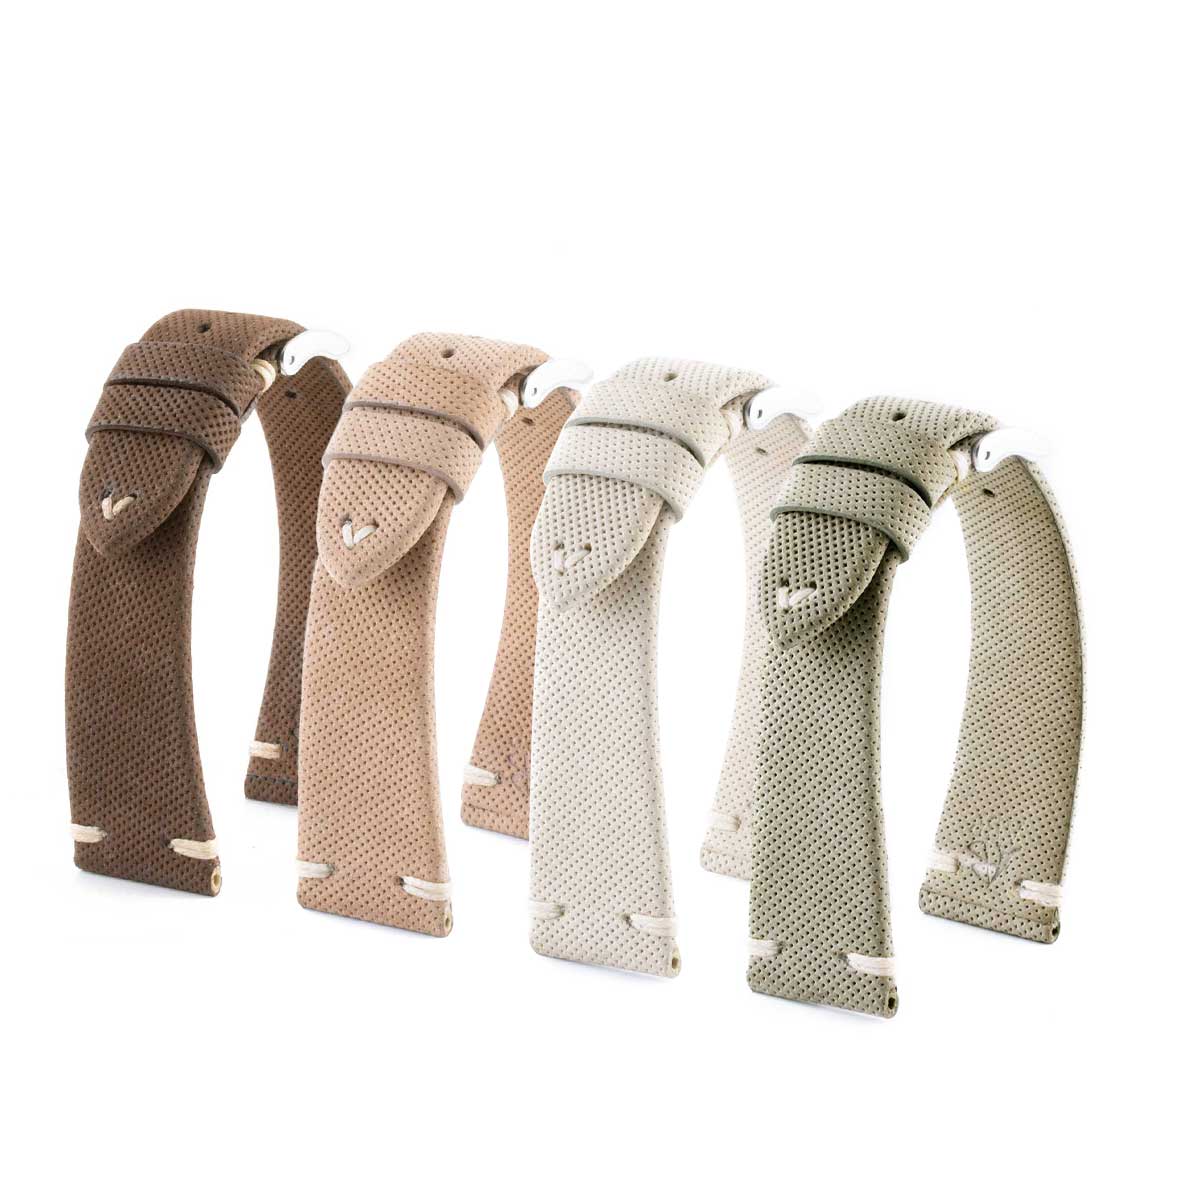 ​Capsule collection - "Soft Grip" leather watch band - Calf (brown, light brown, beige, kaki)